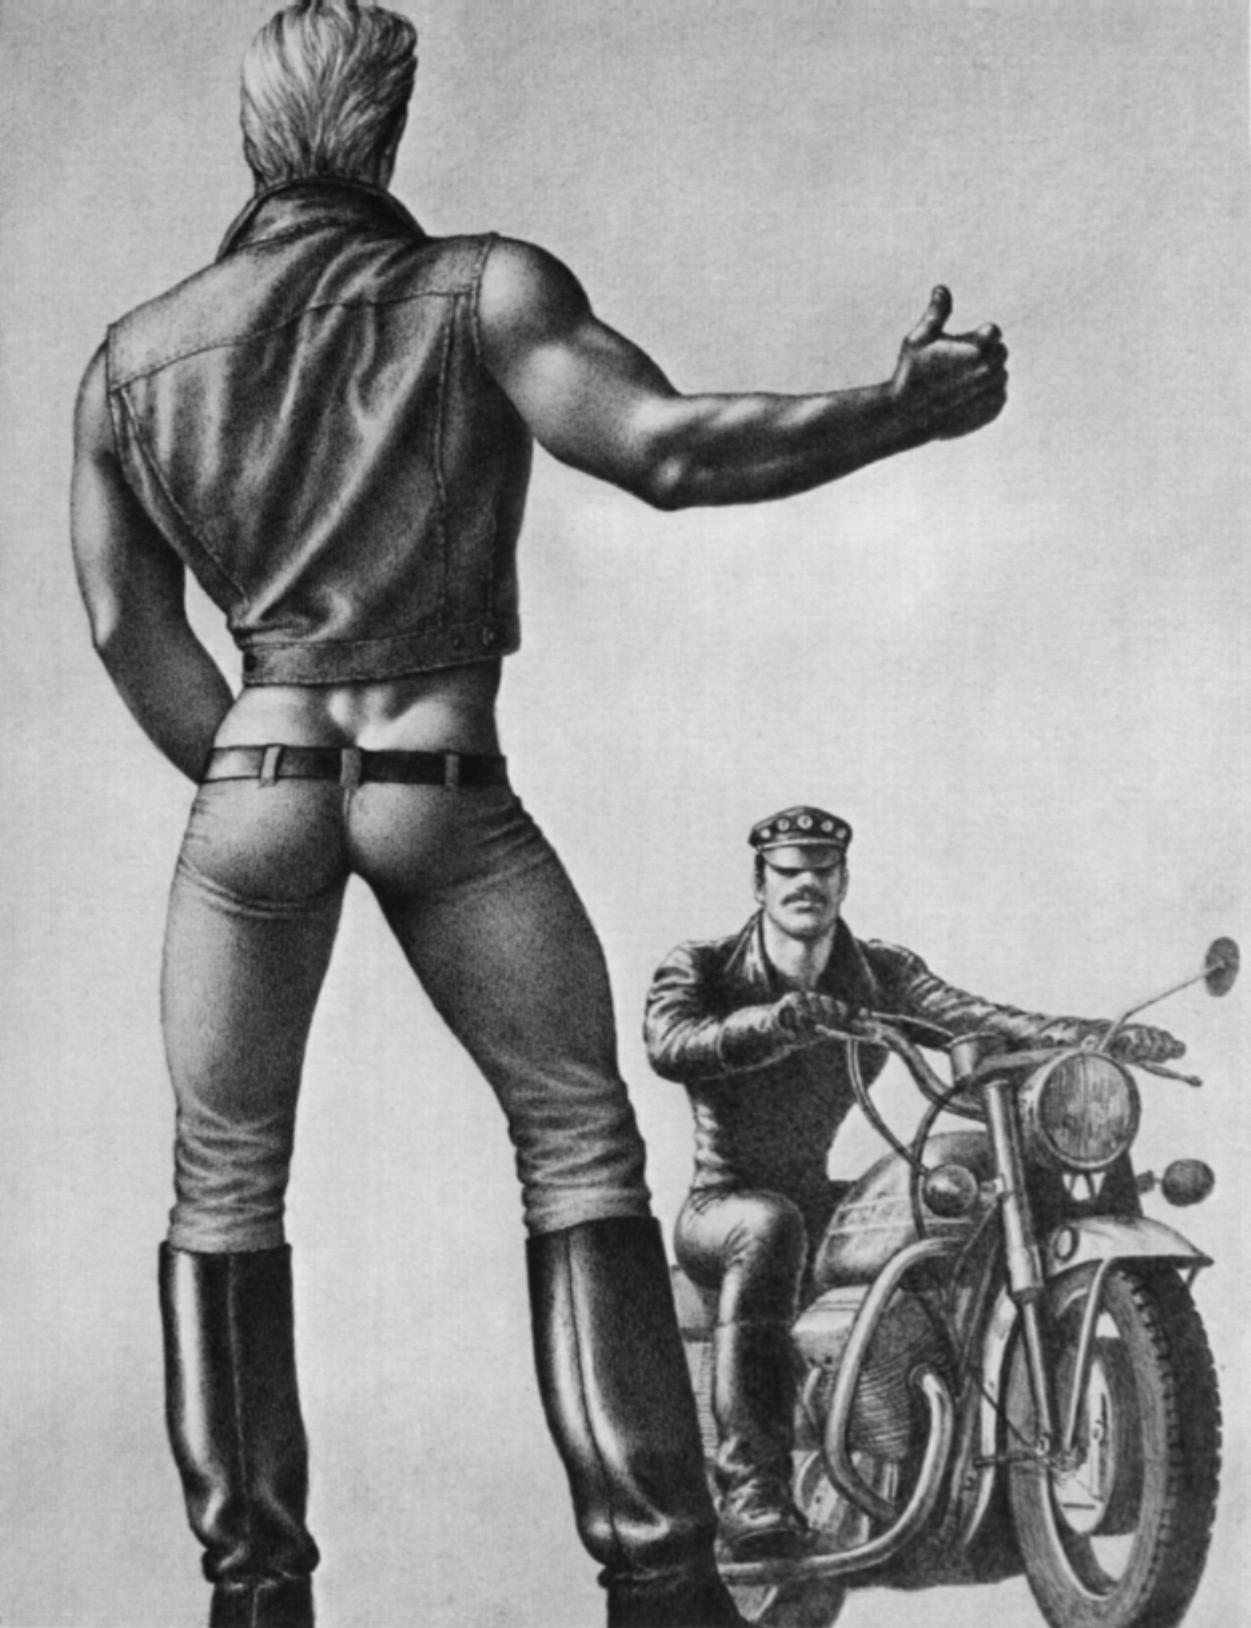 gay-erotic-art:  And now another collection of Tom of Finland’s work but this time